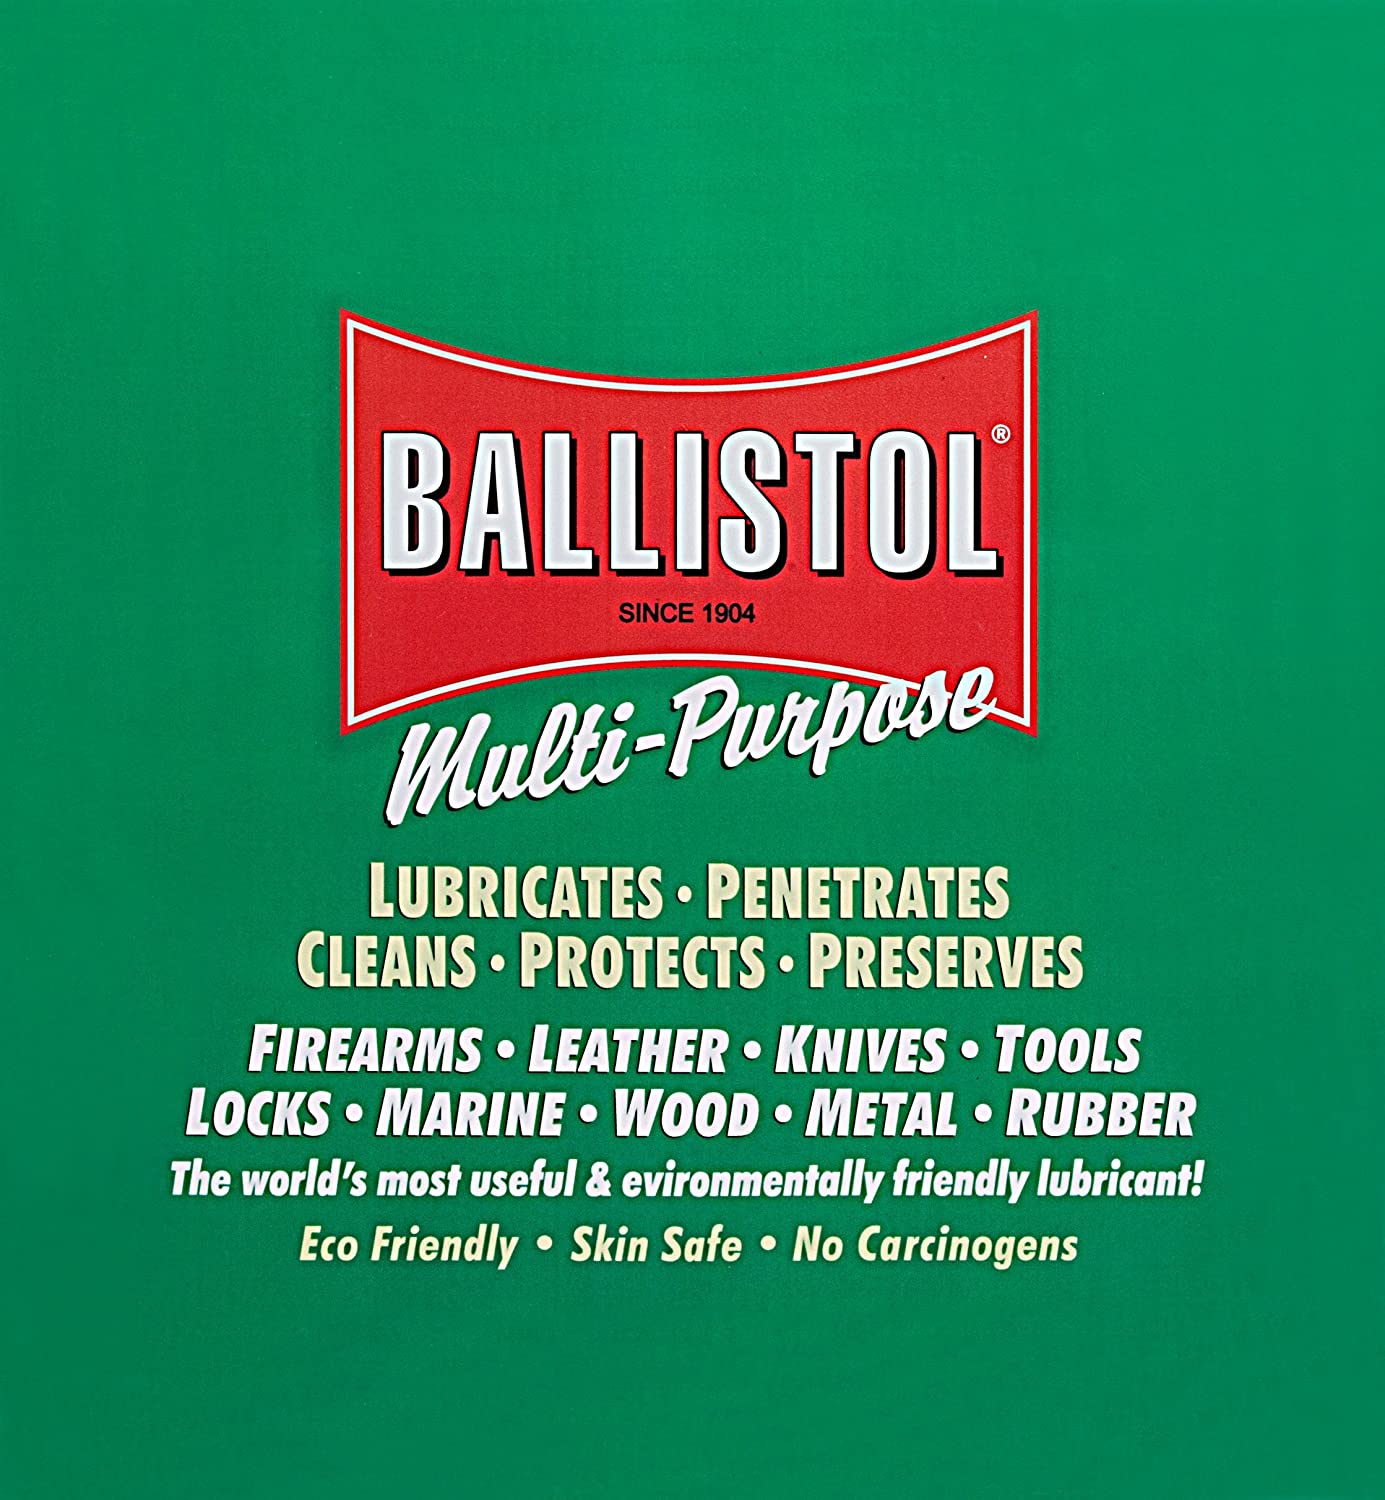 4-Pack Ballistol 6 oz Multi-Purpose Oil Lubricant Cleaner and Protectant for Wood, Metal, Rubber - Pro-Distributing